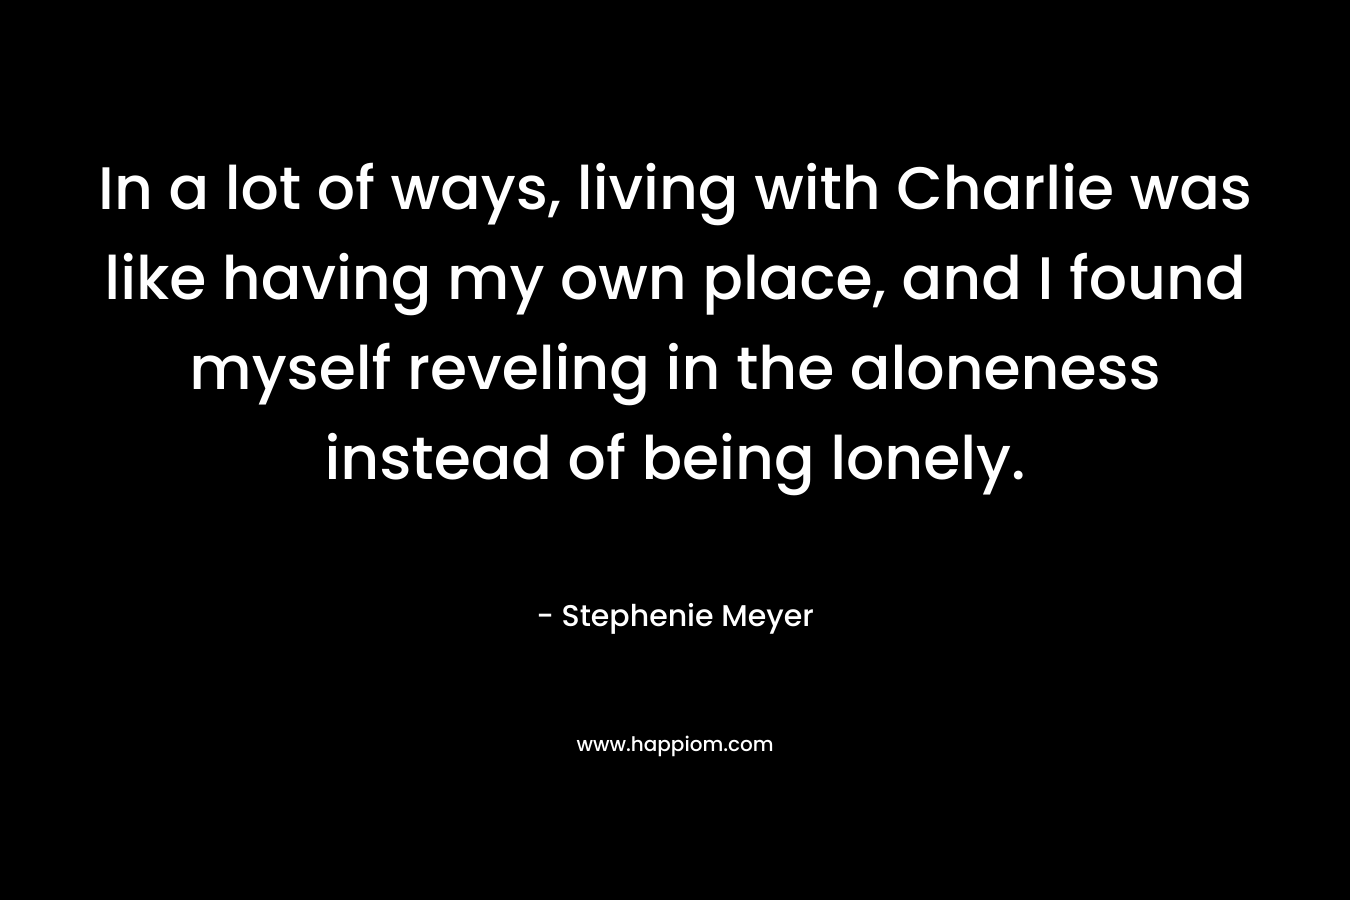 In a lot of ways, living with Charlie was like having my own place, and I found myself reveling in the aloneness instead of being lonely. – Stephenie Meyer